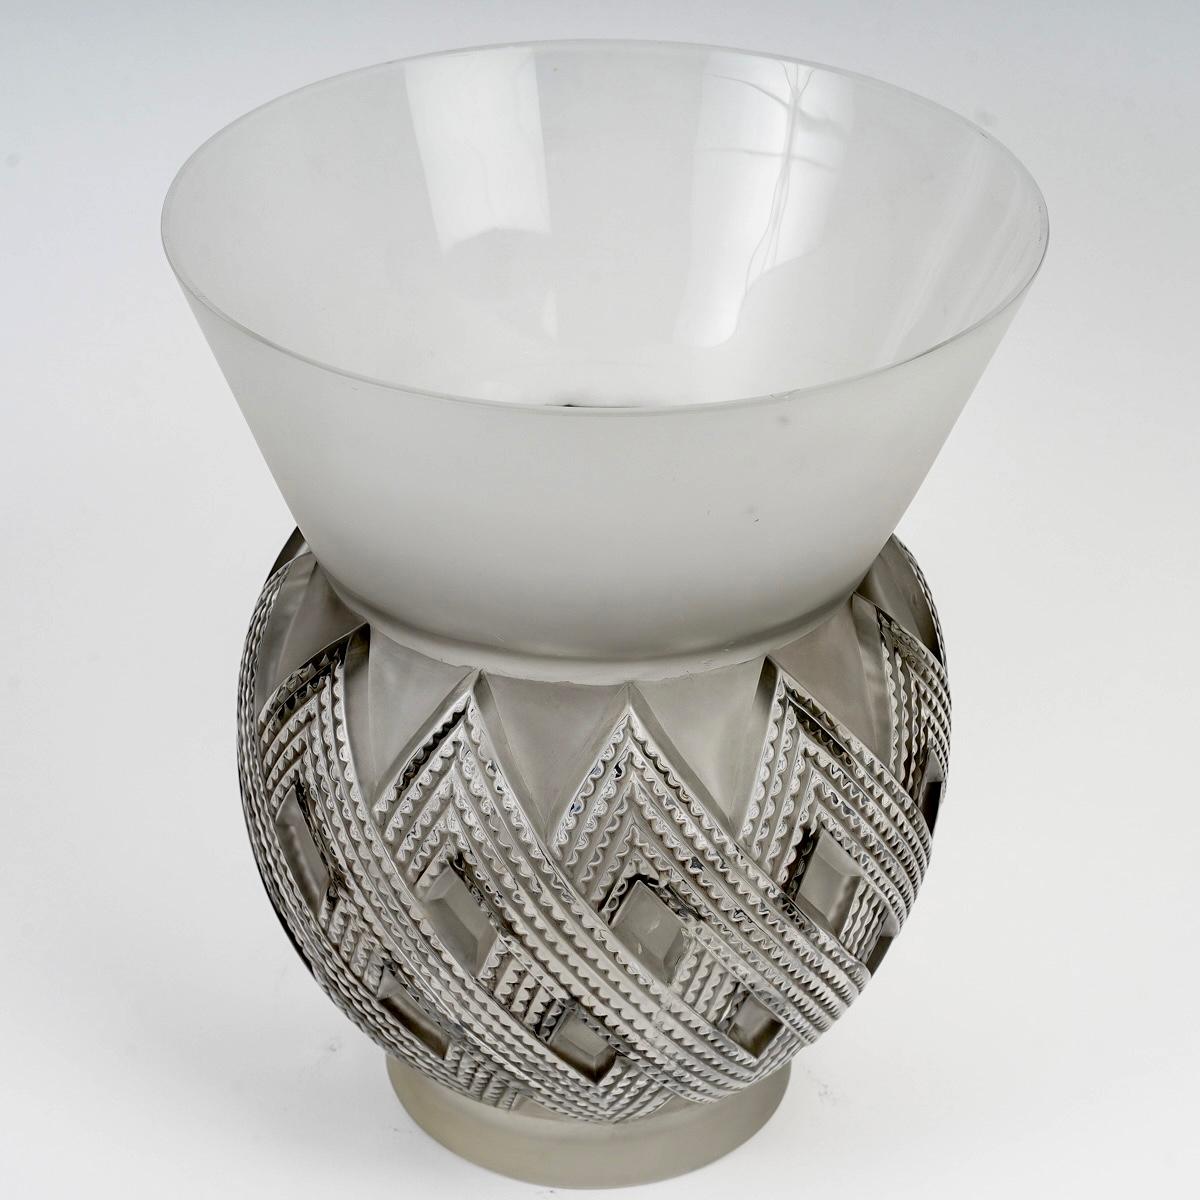 Molded 1935 René Lalique - Vase Entrelacs Frosted Glass with Grey Patina For Sale